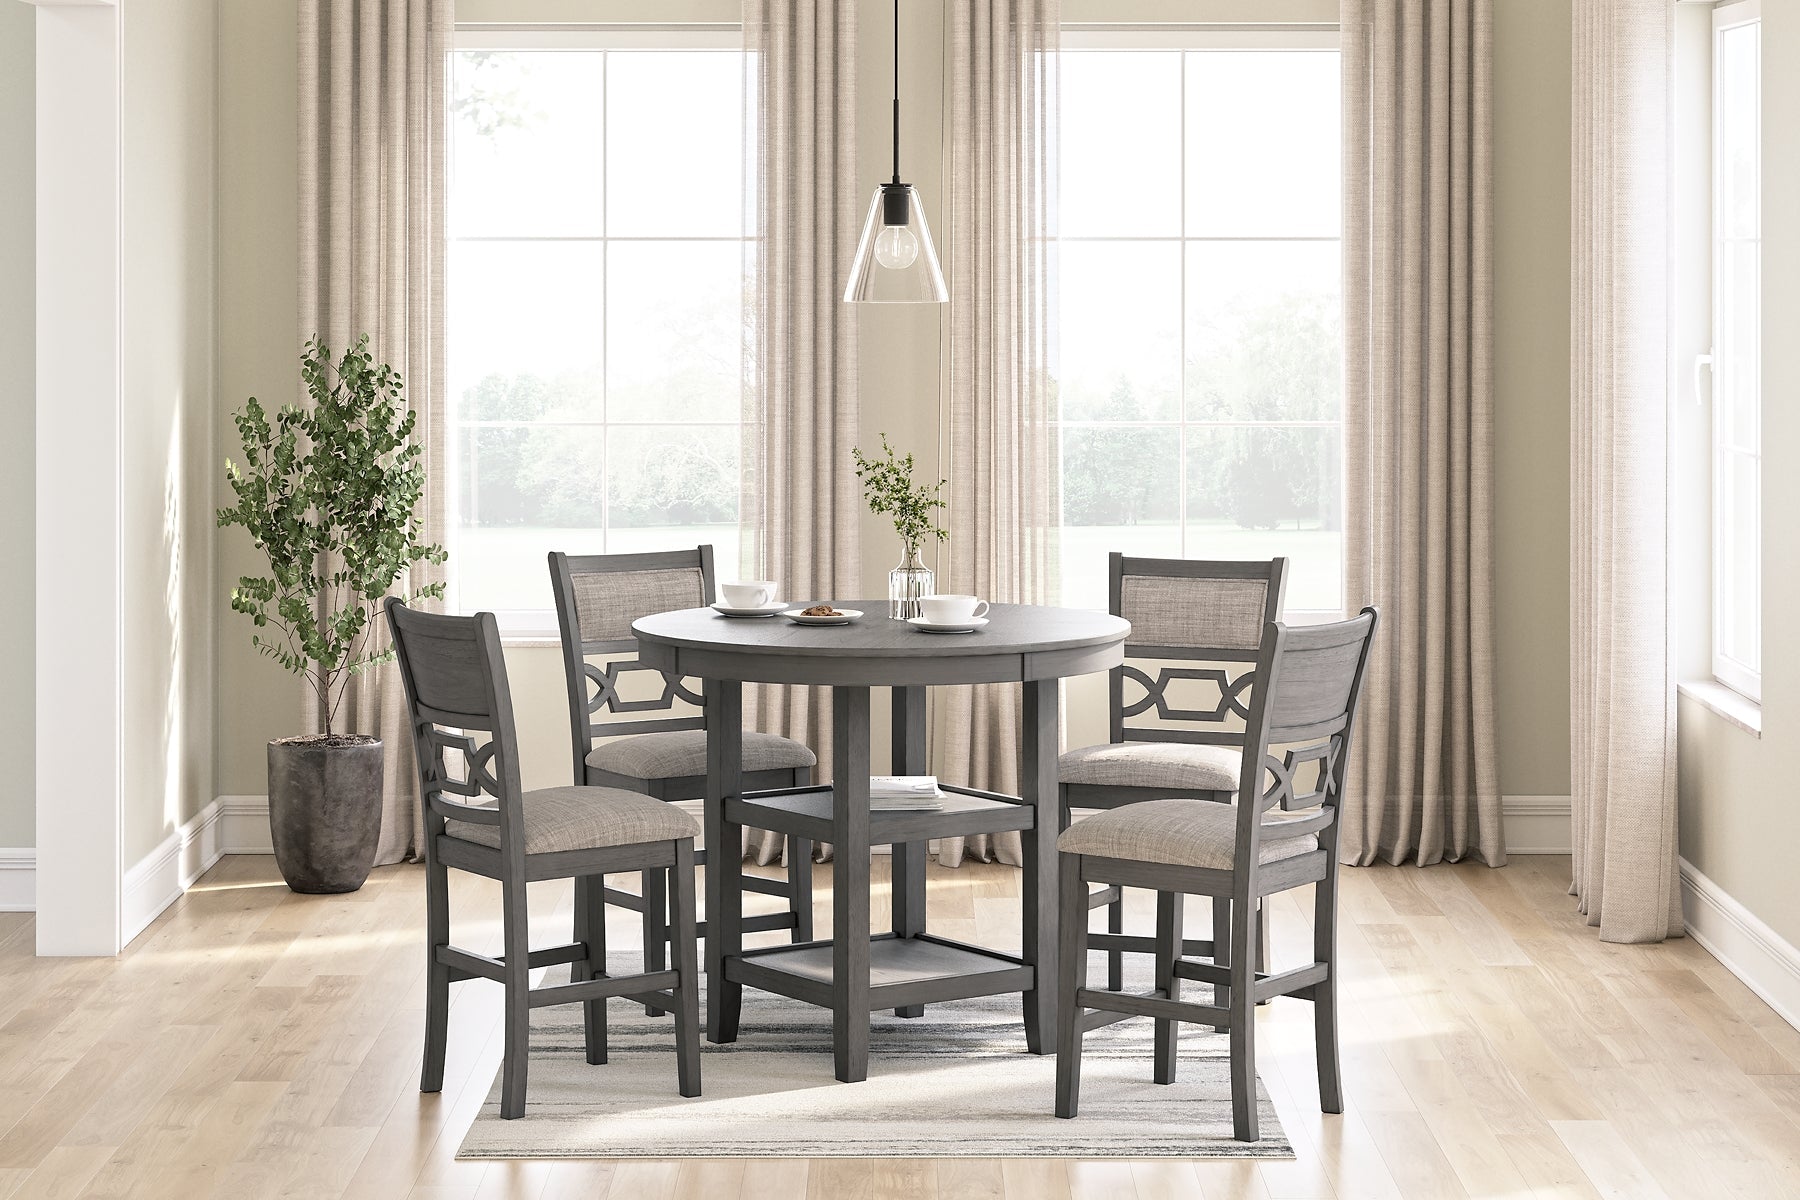 Wrenning Counter Height Dining Table and 4 Barstools (Set of 5)